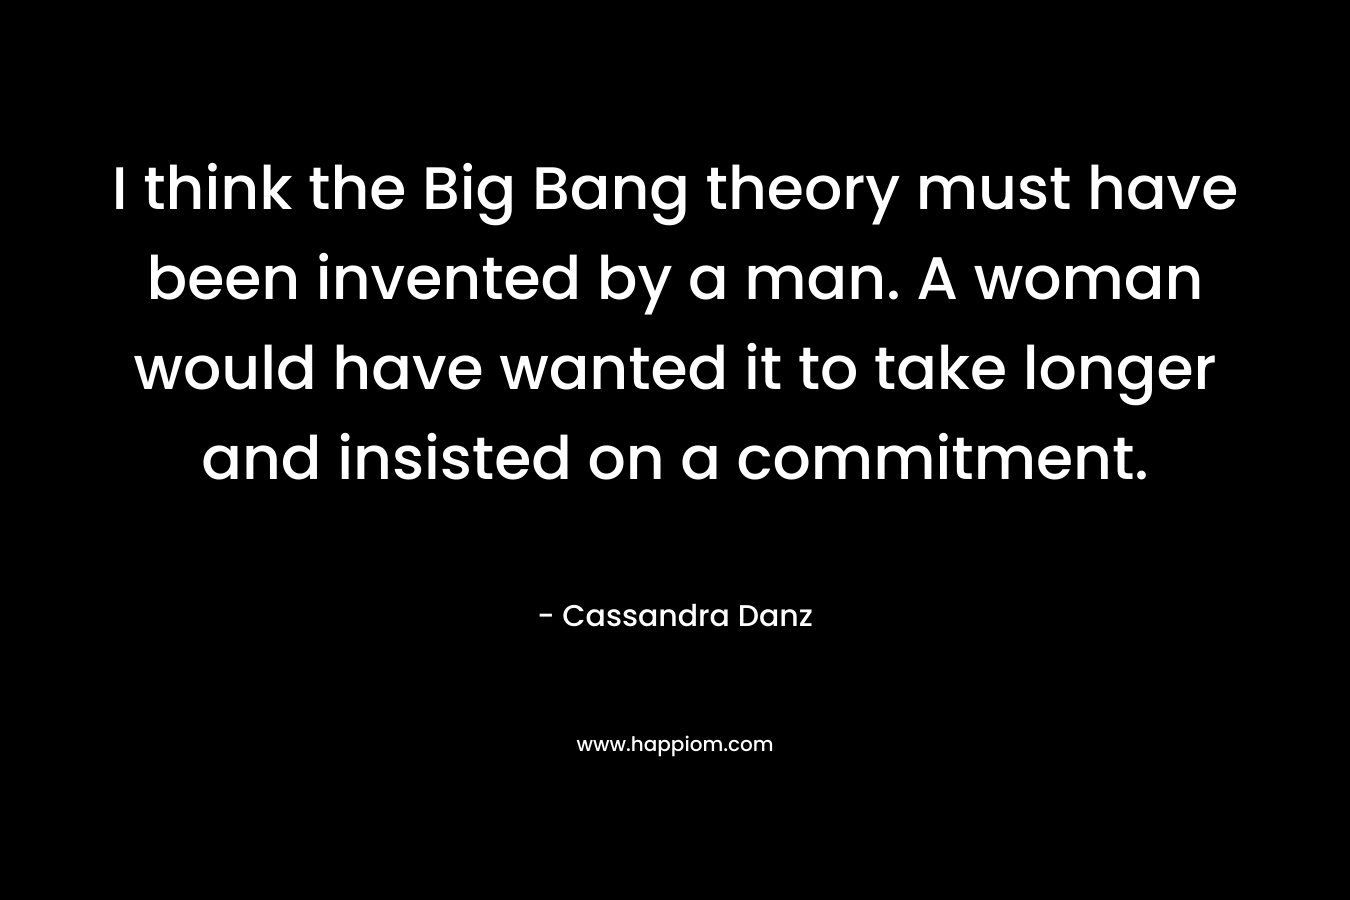 I think the Big Bang theory must have been invented by a man. A woman would have wanted it to take longer and insisted on a commitment. – Cassandra Danz